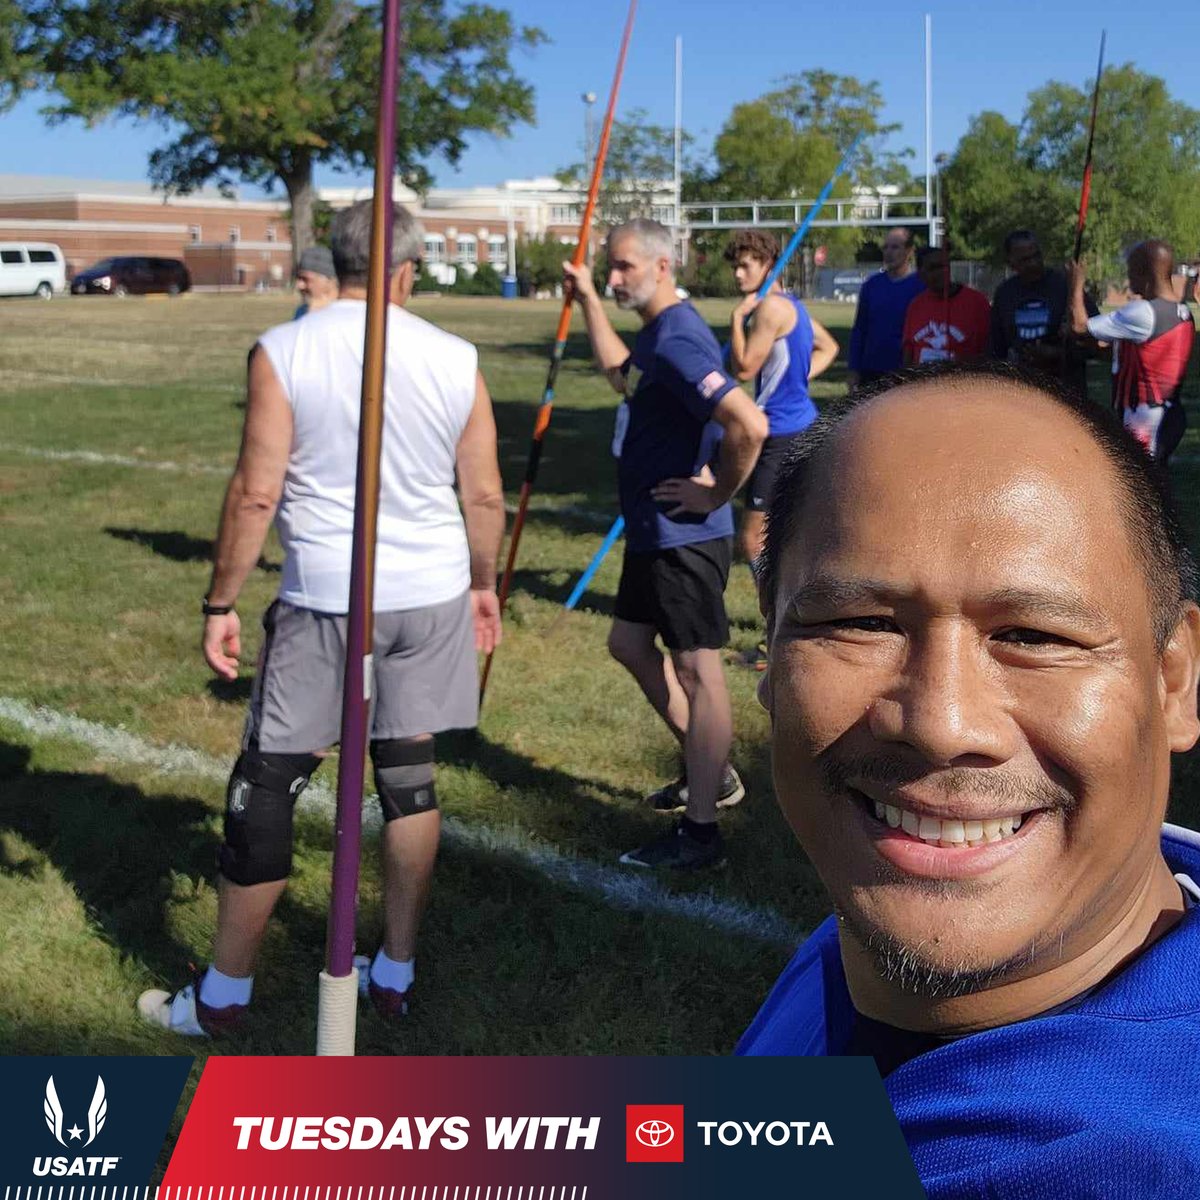 Meet Jonel Accad, our April #TuesdayWithToyota feature

Each javelin throw symbolizes resilience and triumph in Jonel's journey. Track and field isn't just about fitness—it's a pillar of mental well-being, fostering positive habits. 

Read more here: bit.ly/49UIZy5